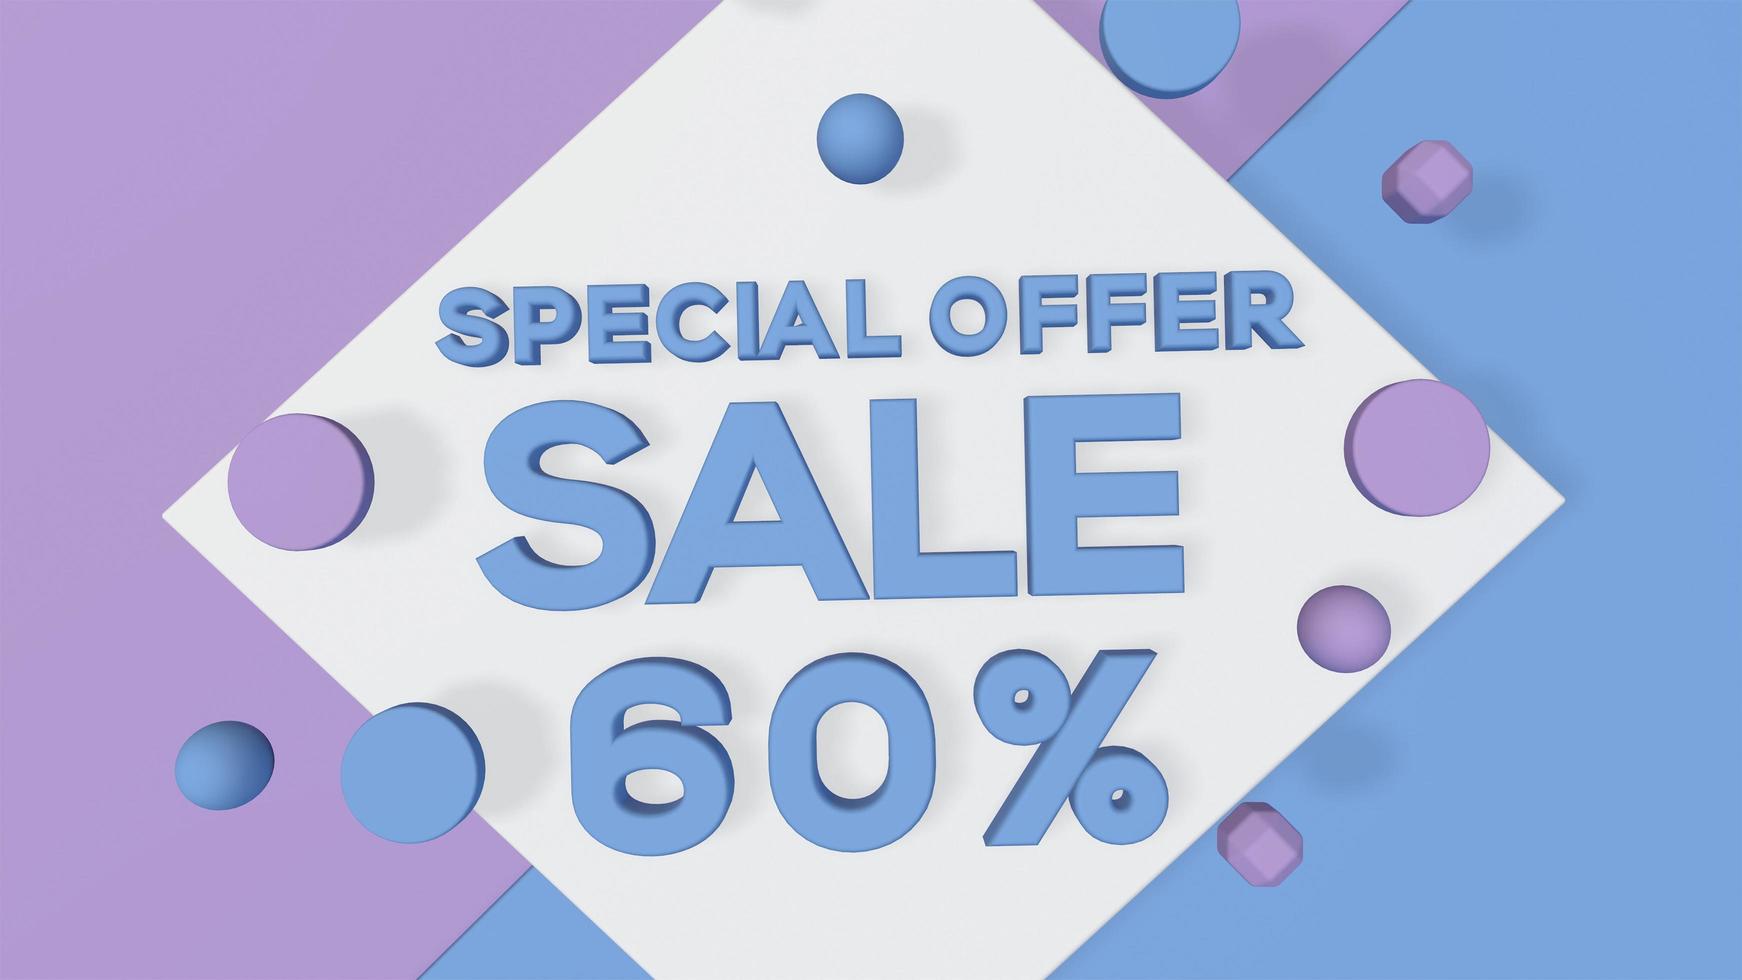 3d render special offer sale 60 word use for landing page,web, poster, banner, flyer, background, gift card, coupon, label,sale promotion,advertising, marketing photo